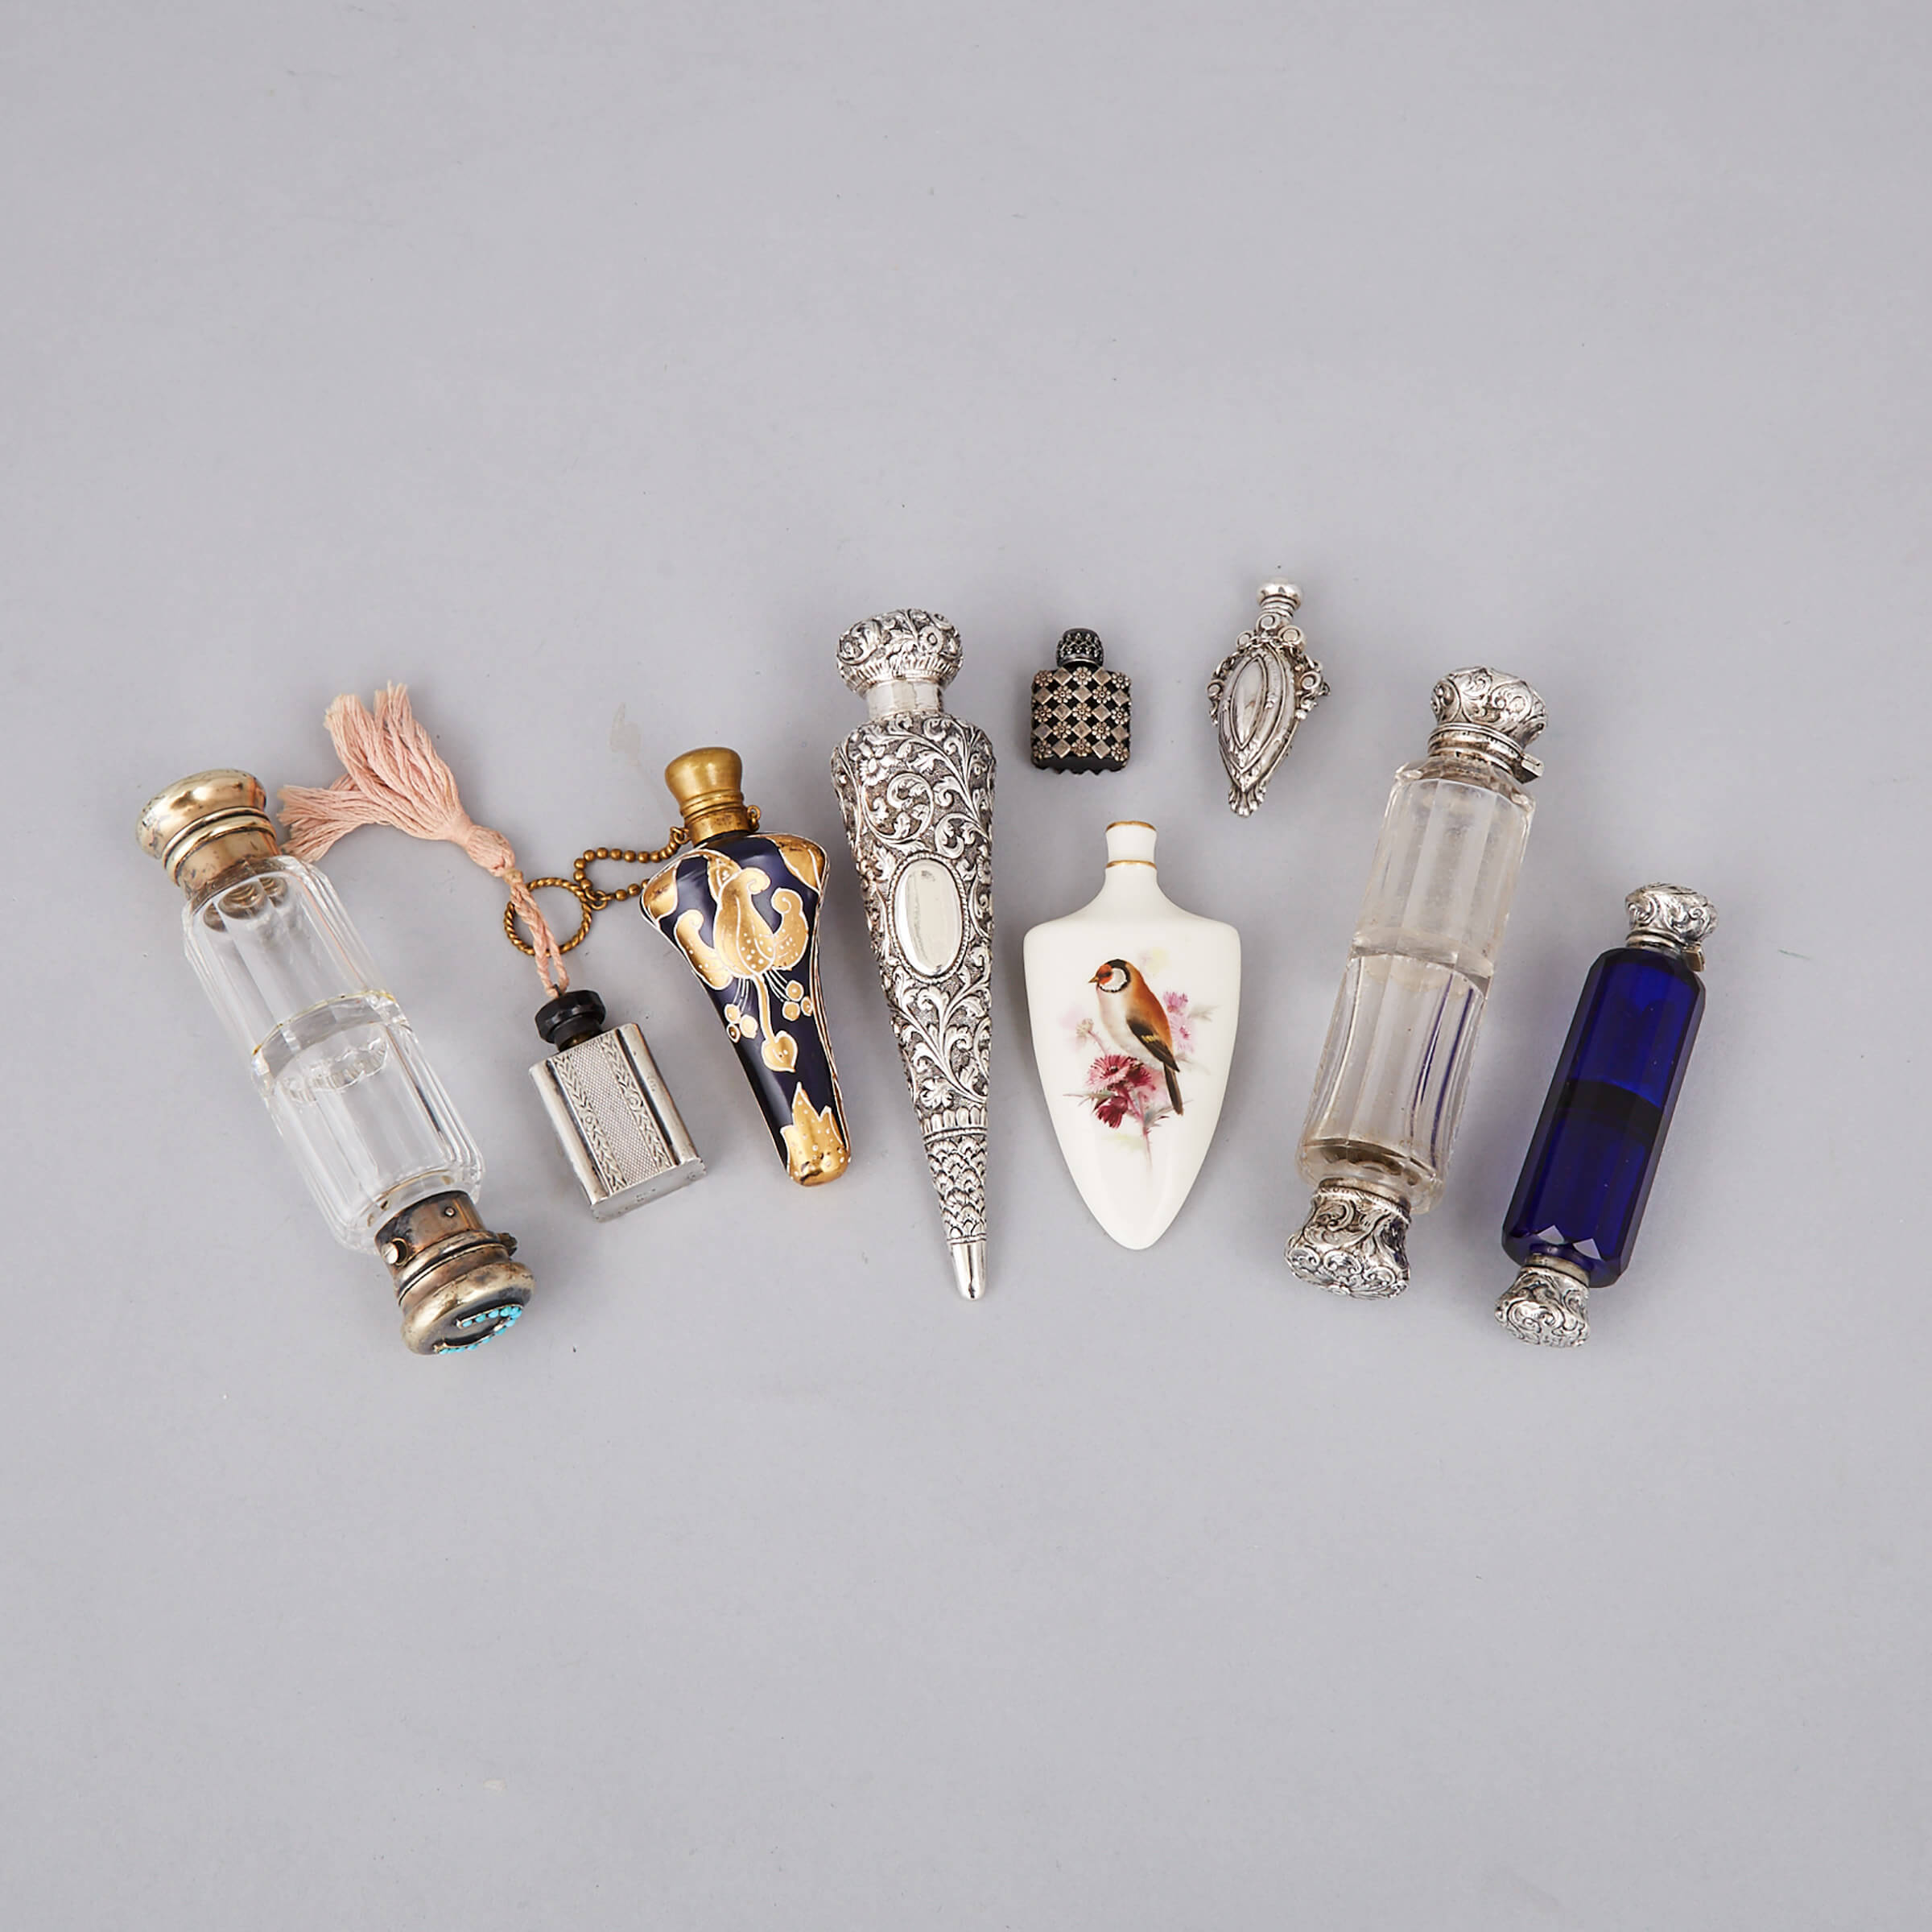 Nine Various Silver, Metal, Glass and Porcelain Perfume Bottles and Phials, late 19th/20th century